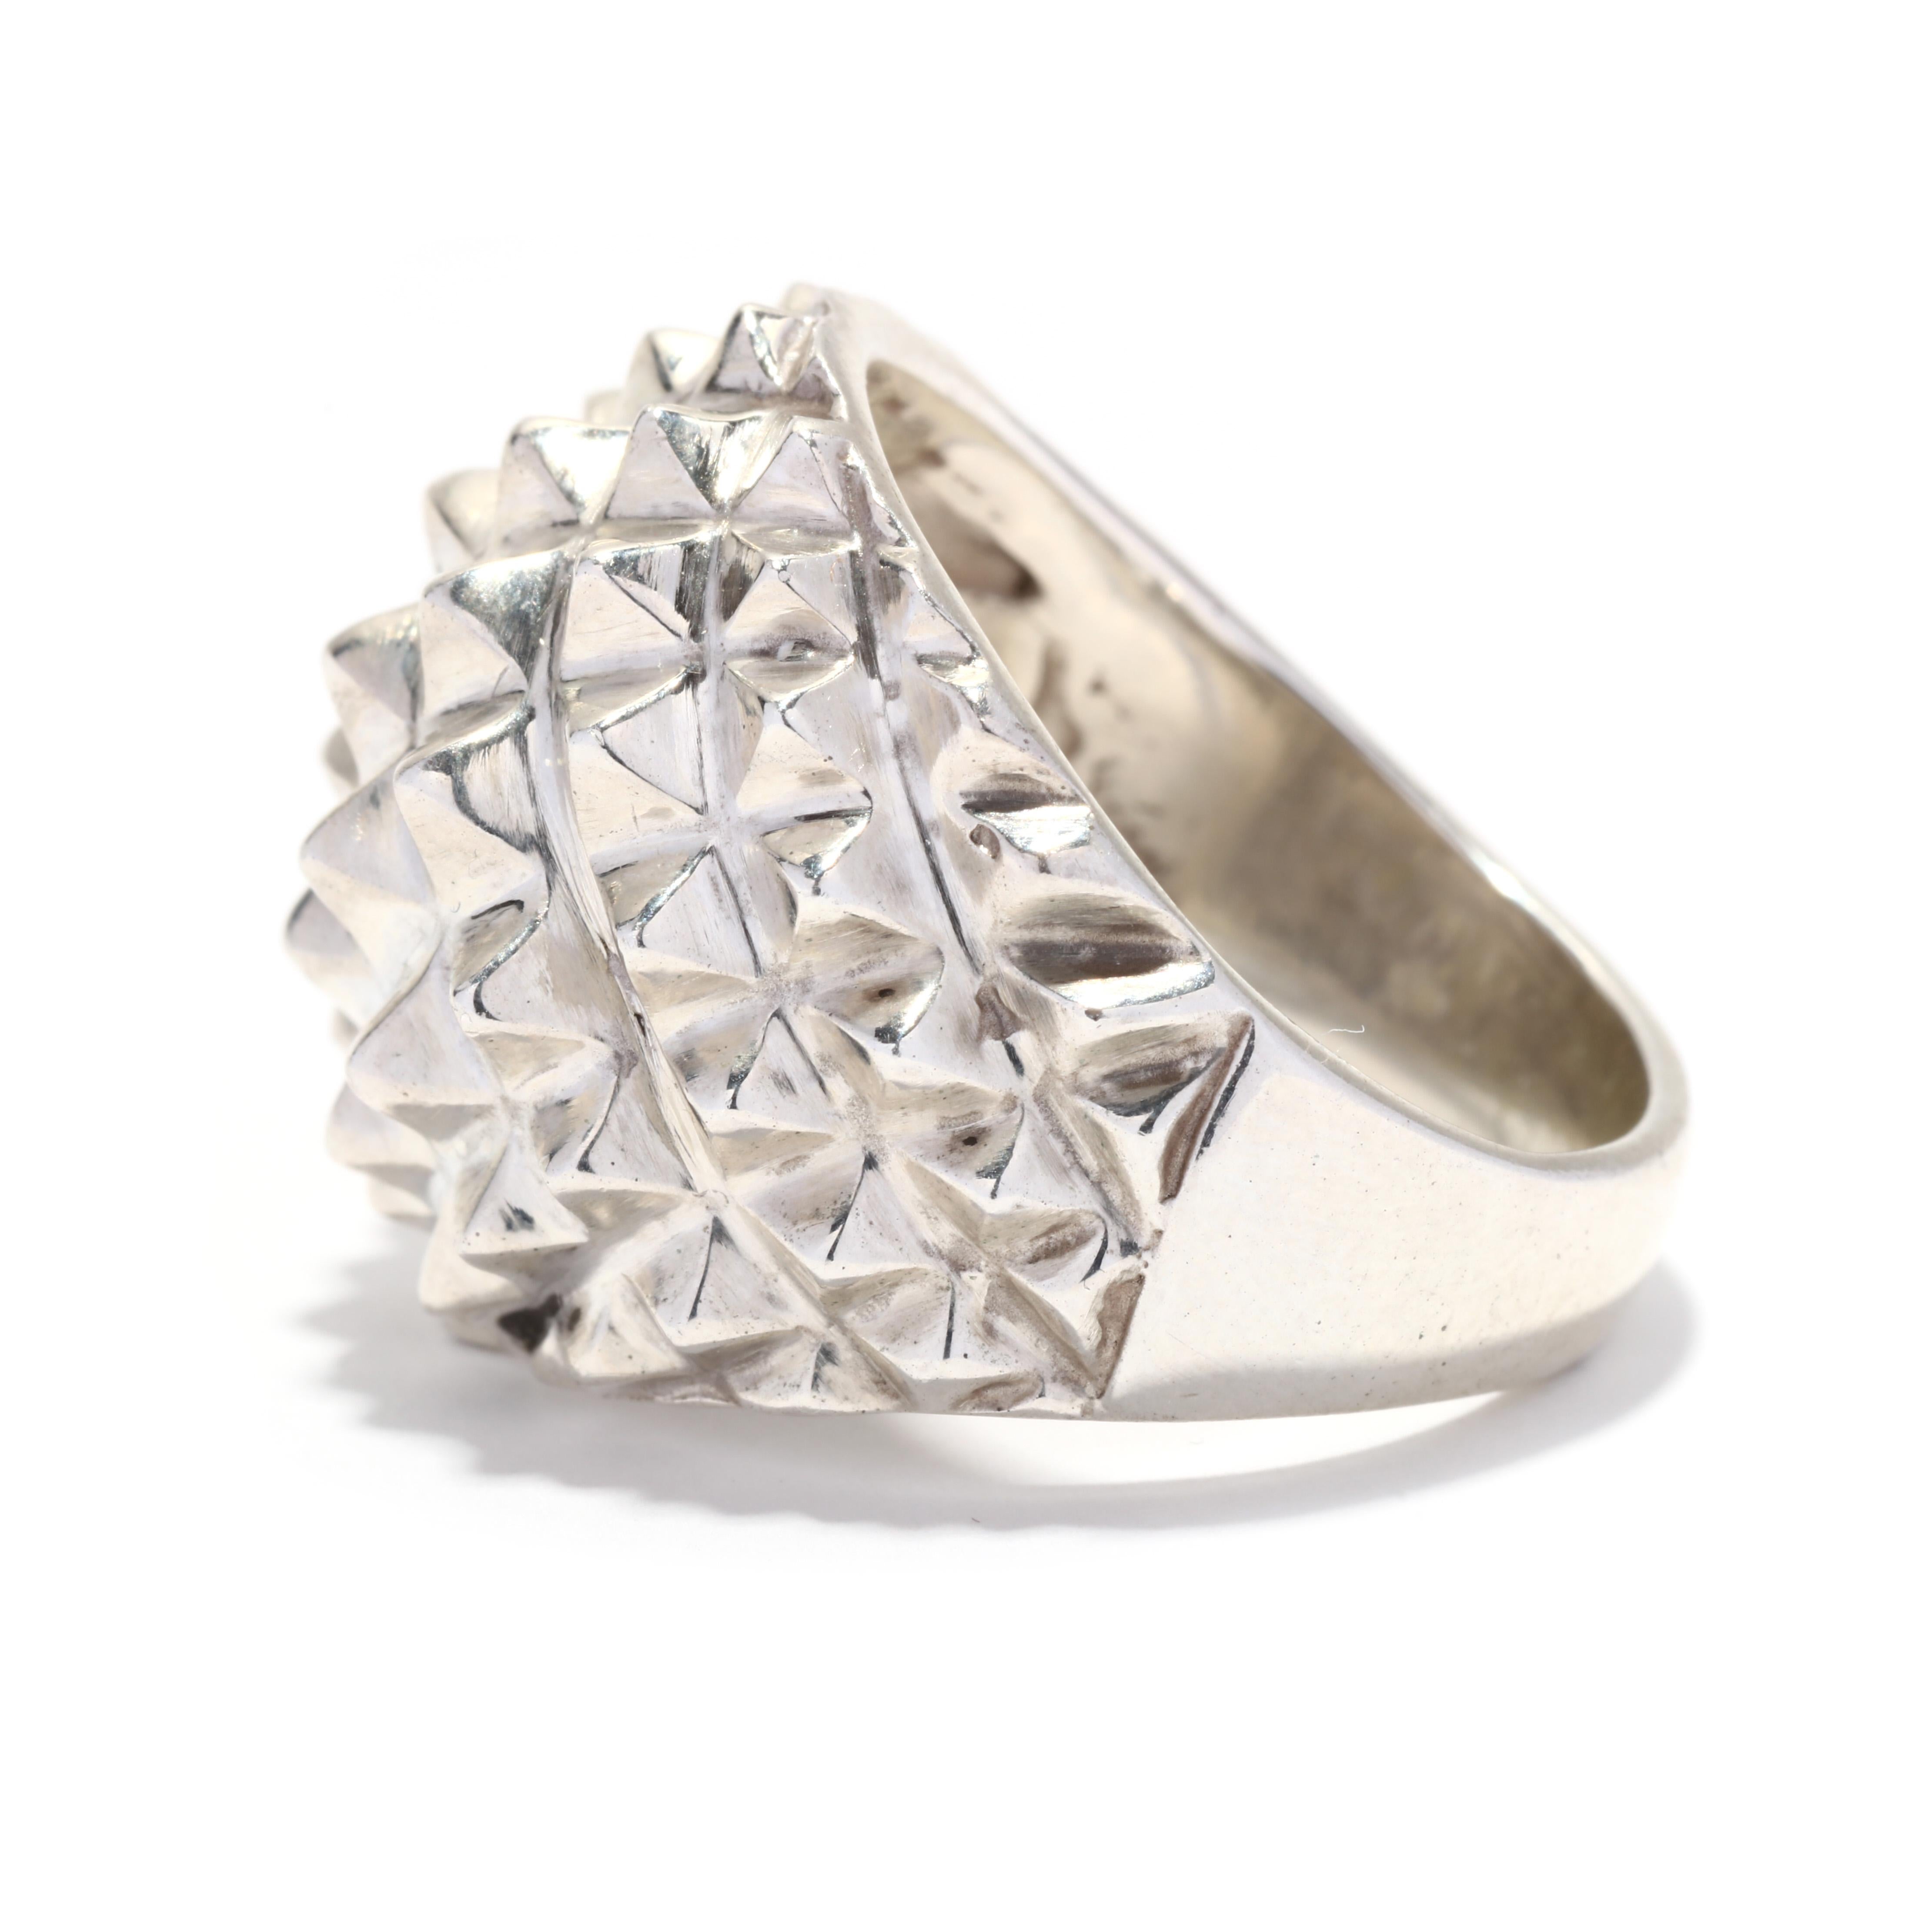 Vintage Sterling Silber Pyramide Spike Dome Ring im Zustand „Gut“ im Angebot in McLeansville, NC